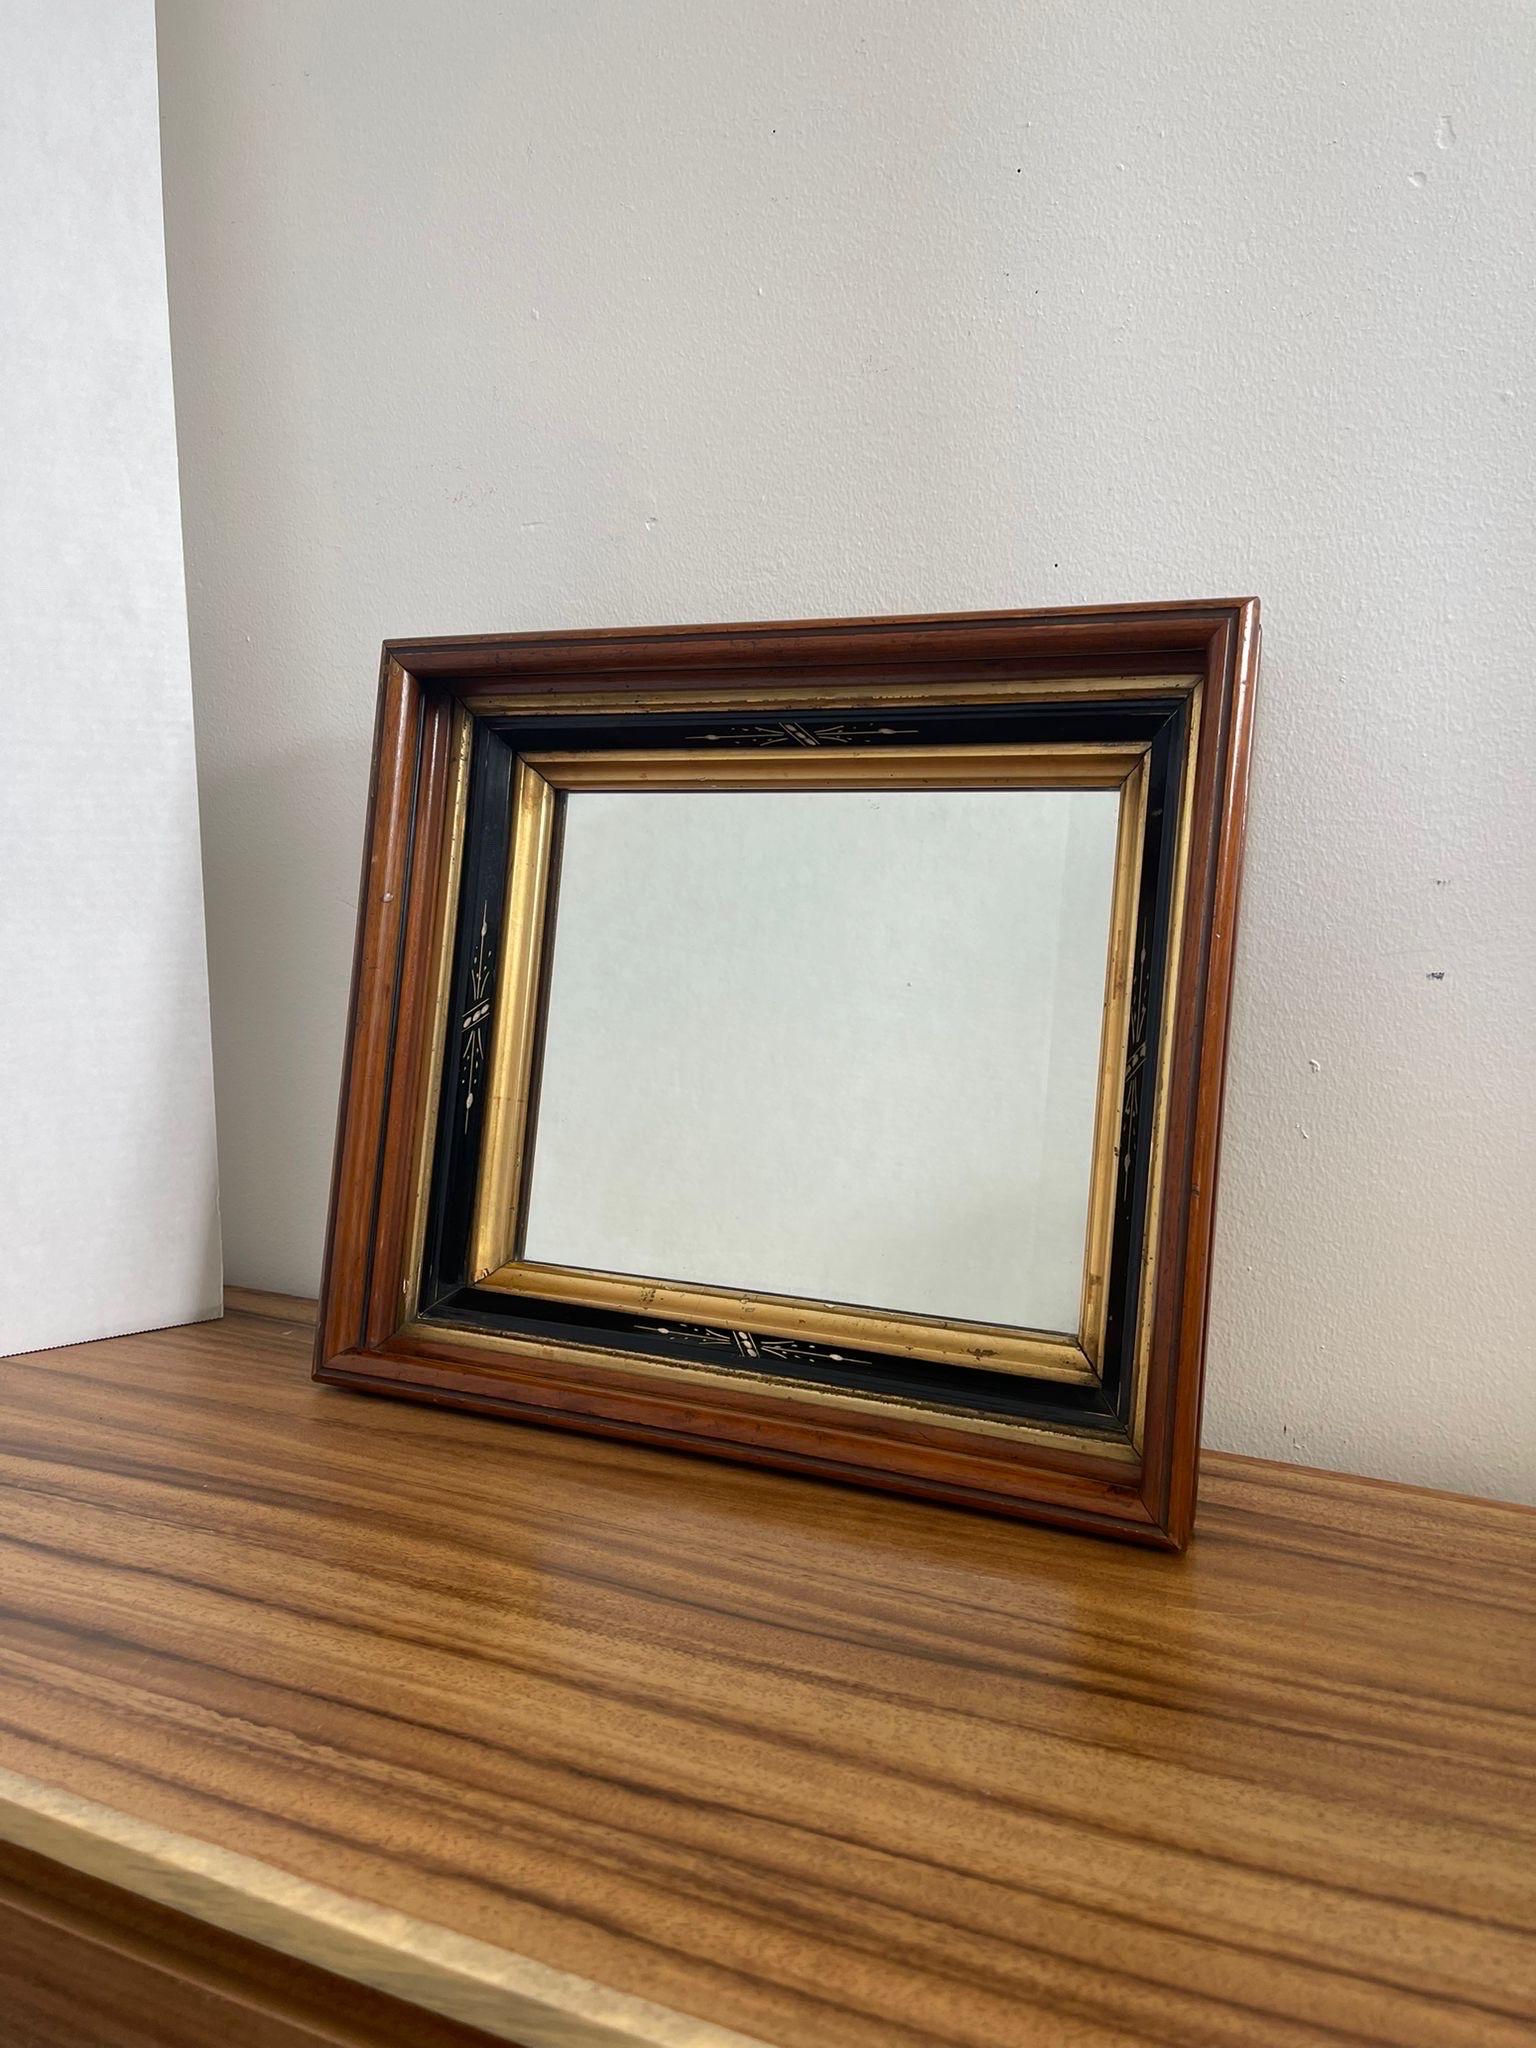 Walnut Toned wood Mirror with painted black and gilt accents. Motif accents each side of the frame. Slight Patina to the glass. Deep set bevel framing. Vintage Condition Consistent with Age as Pictured.

Dimensions. 16 1/2 W ; 3 1/2 D ; 14 1/2 H